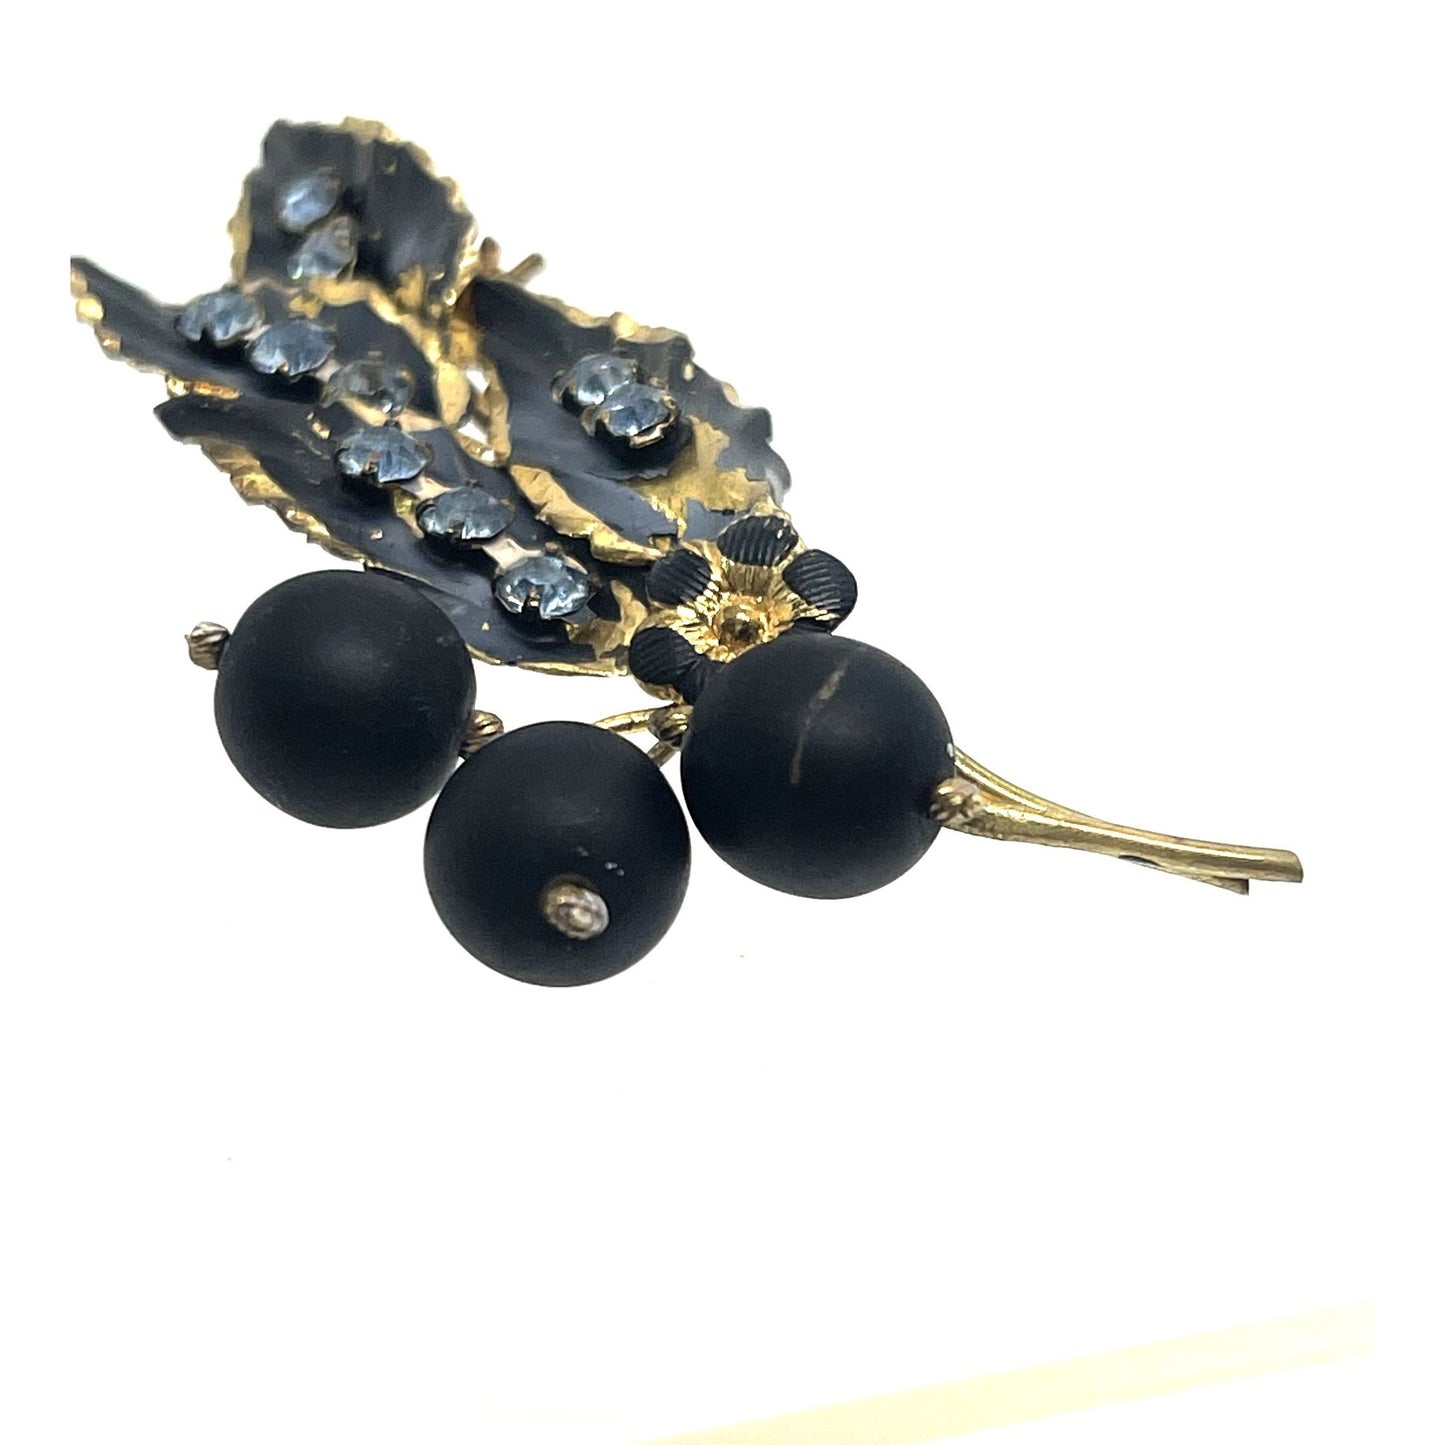 Signed Austrian Made Gold Toned Brooch with Black Enamel and Blue Crystal, Vintage 1950s